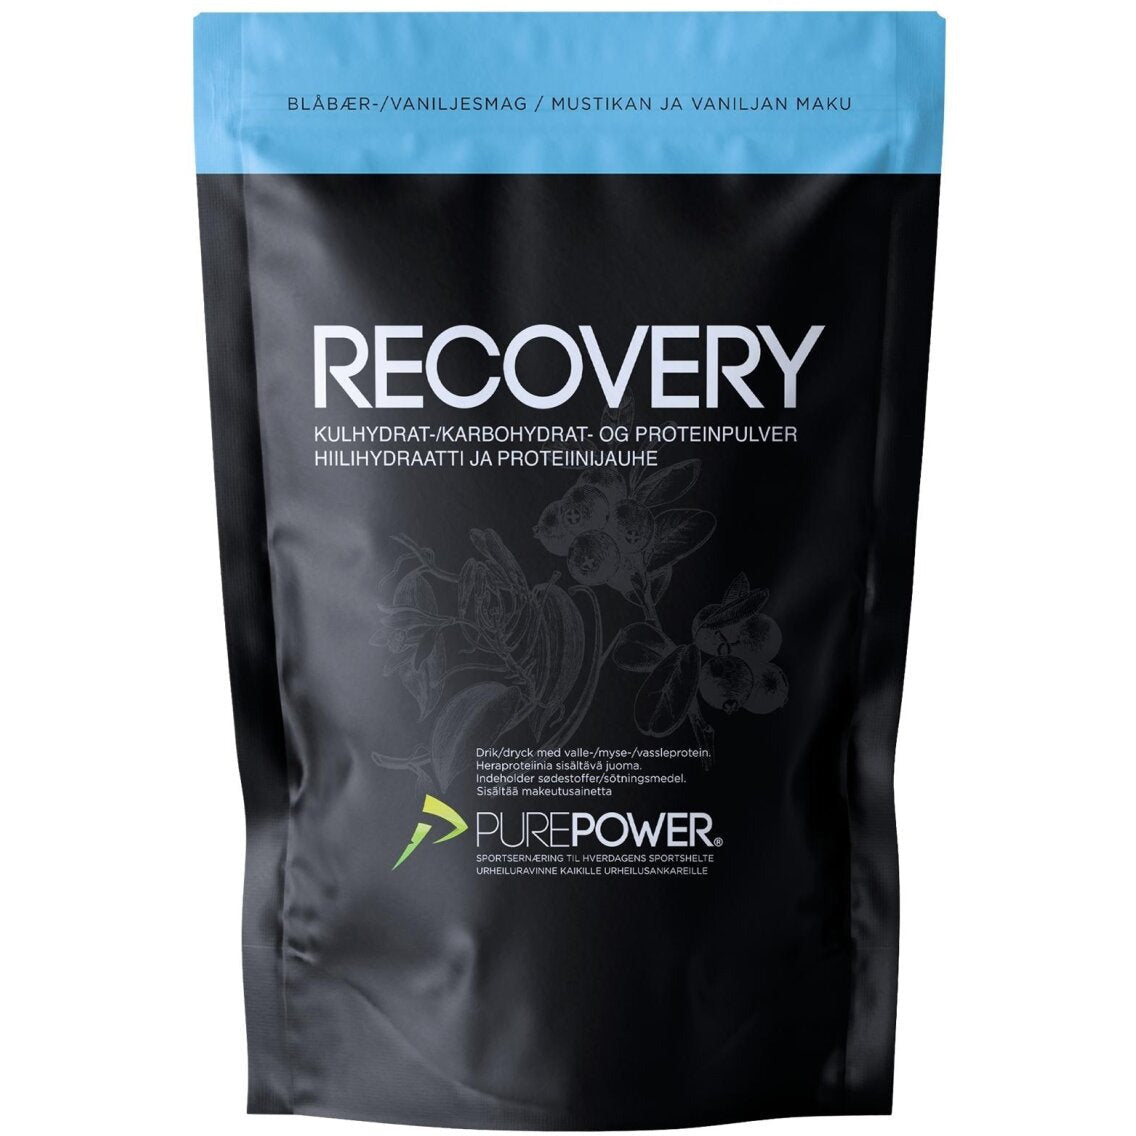 Purepower recovery 1kg